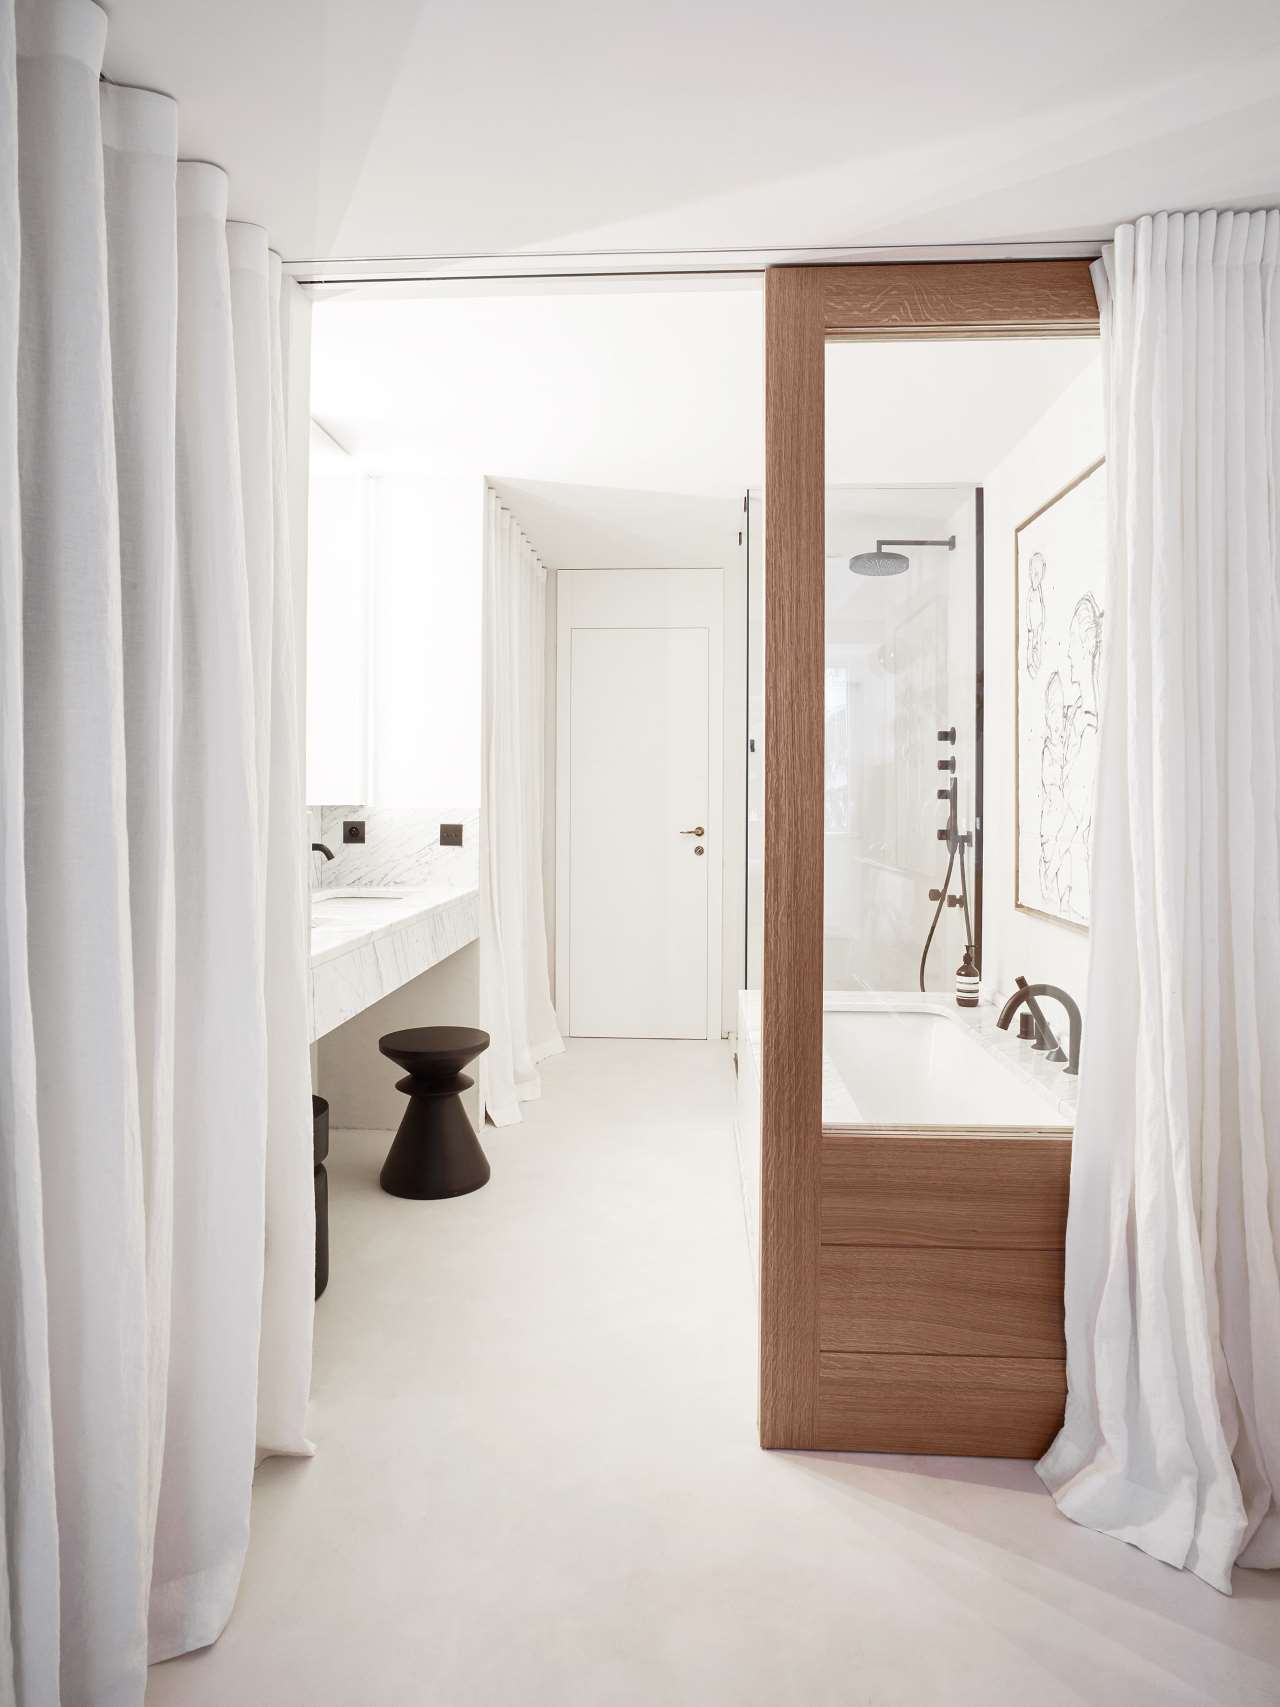 The bbathroom is also white, with a tub, a marble floating vanity, a wooden door and some curtains for privacy